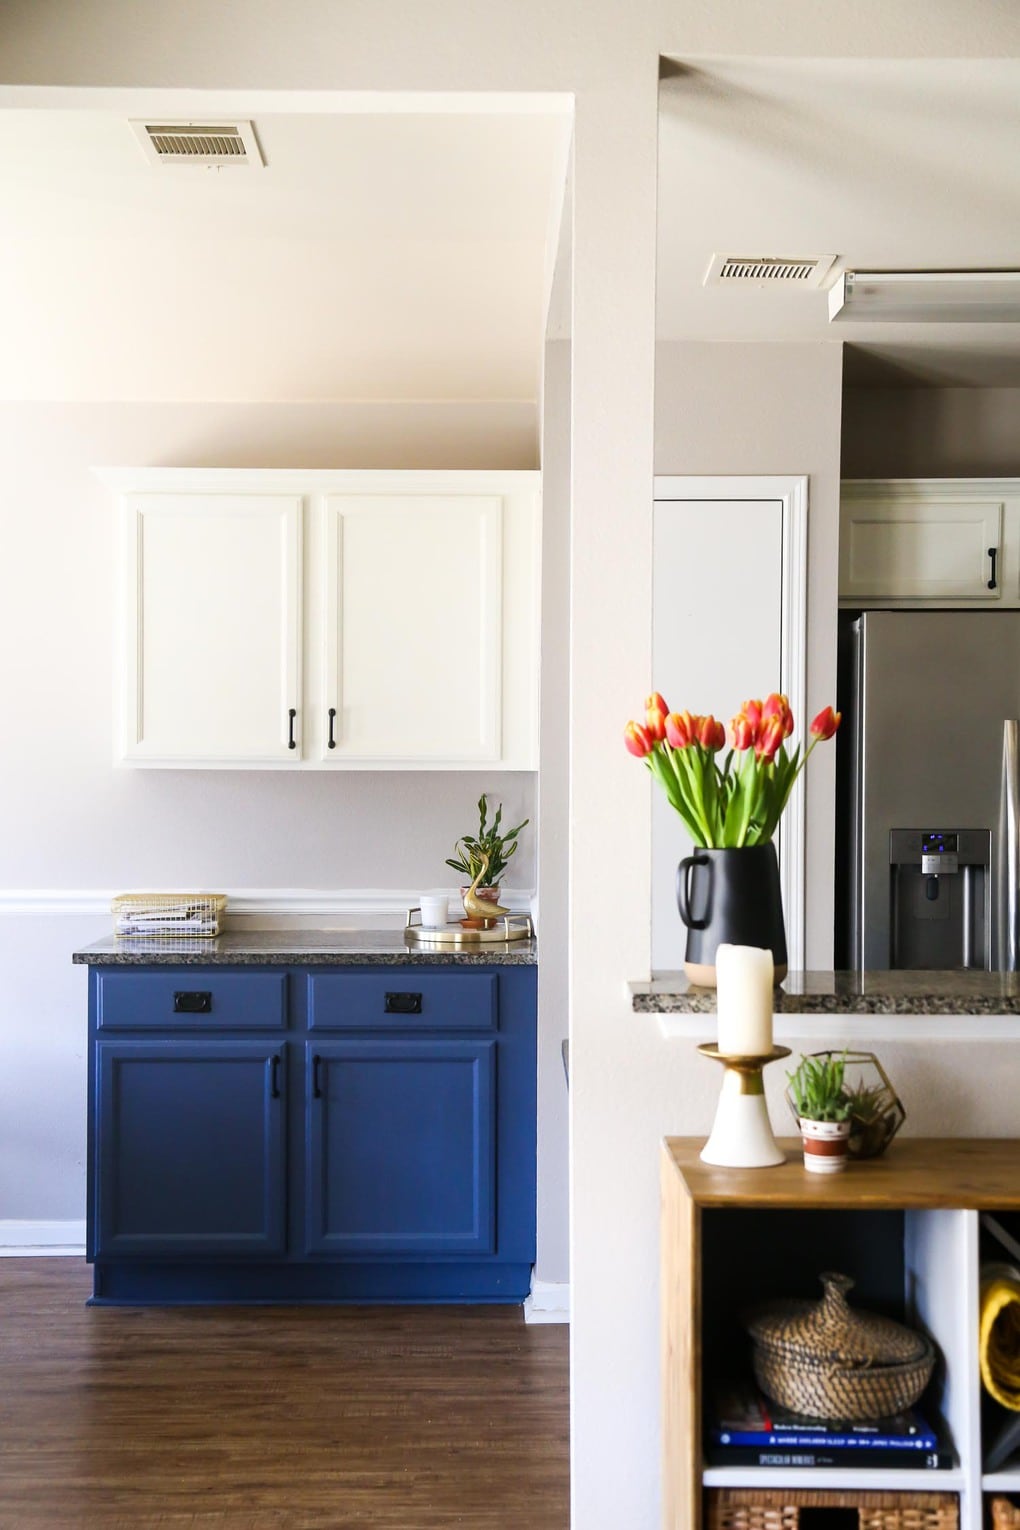 Tips for painting kitchen cabinets quickly and easily